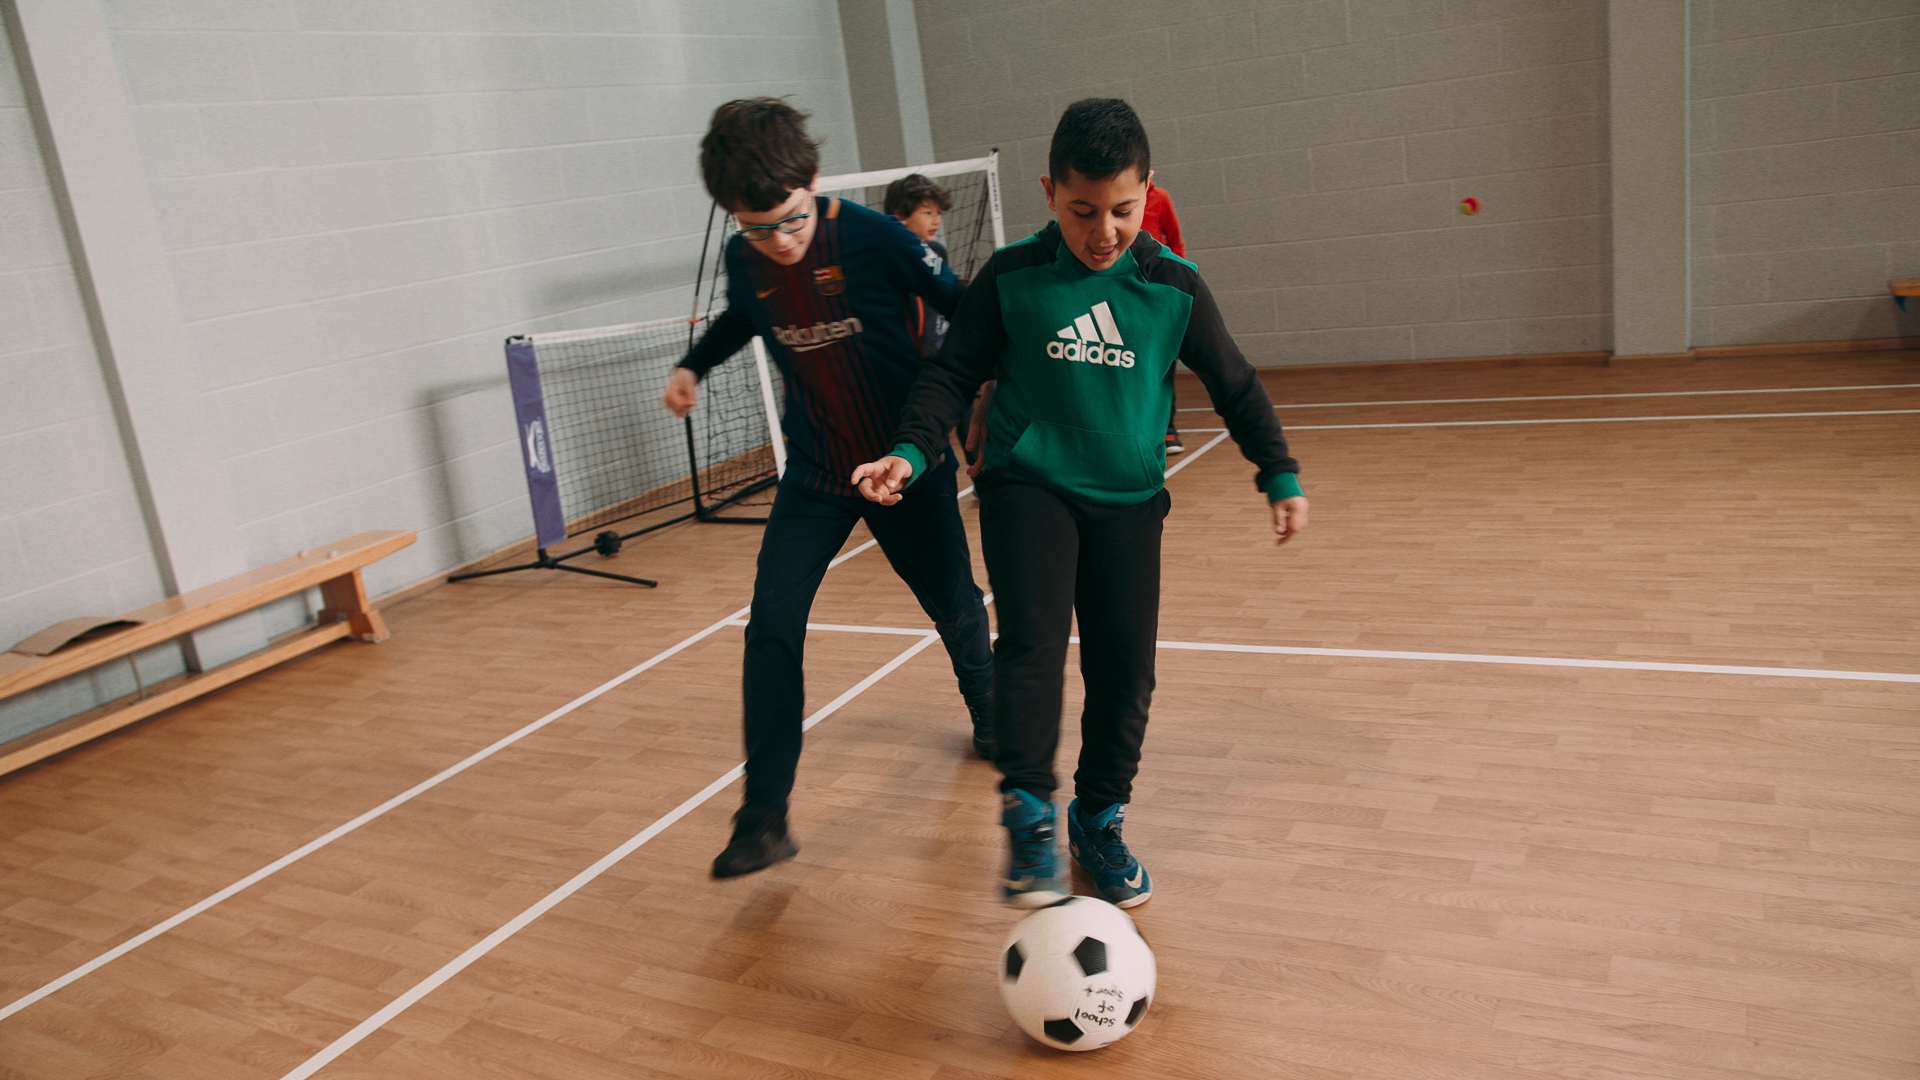 You are currently viewing Why Choose Our School of Play Futsal Holiday Camp?